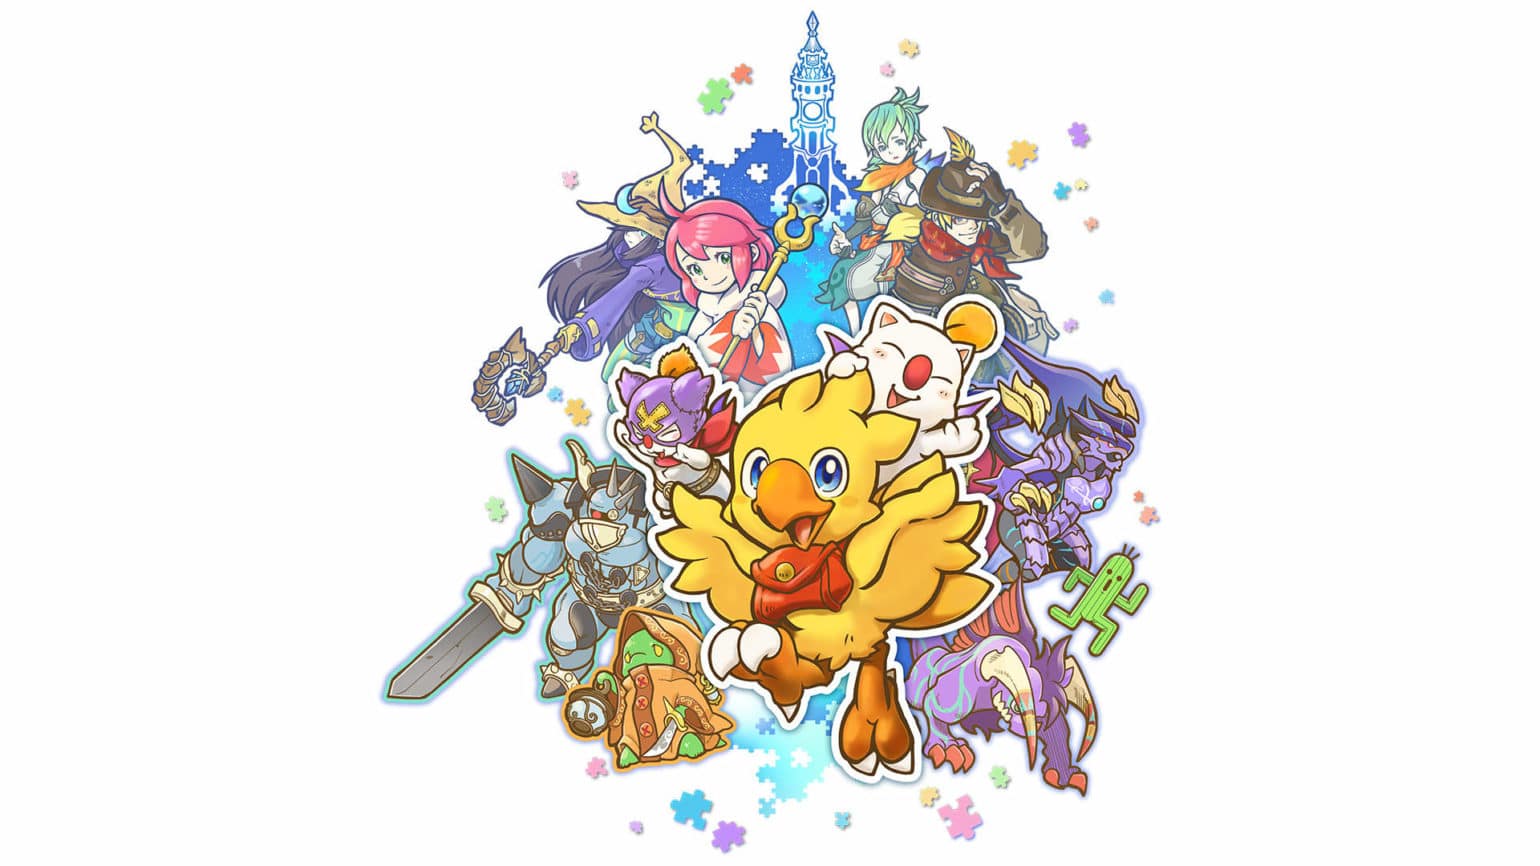 Chocobo's mystery dungeon every buddy! - Illustration